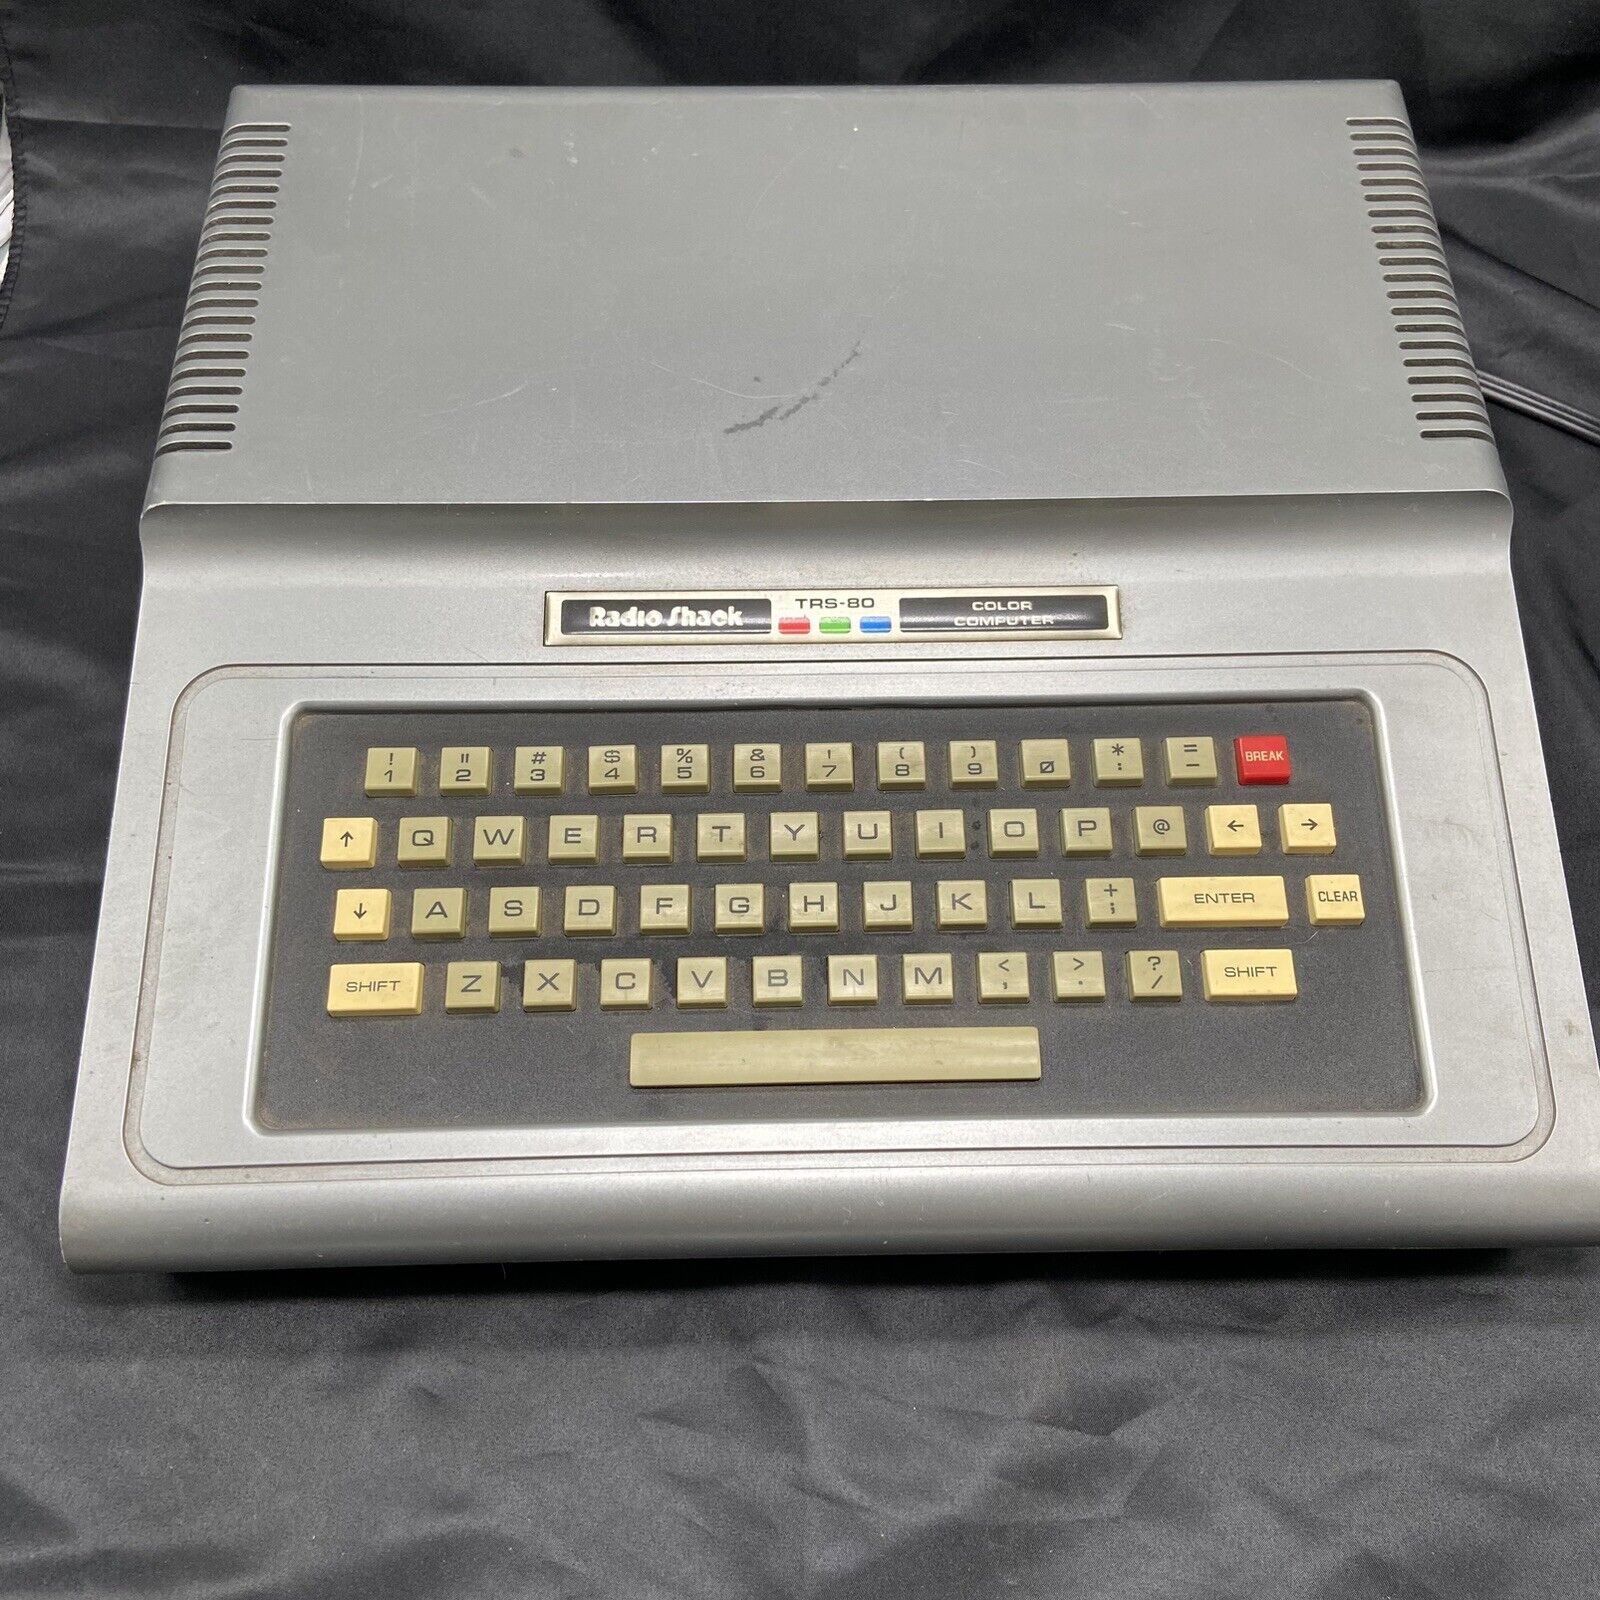 Radio Shack Tandy TRS-80 Color Computer Model: 26-3002A. Untested